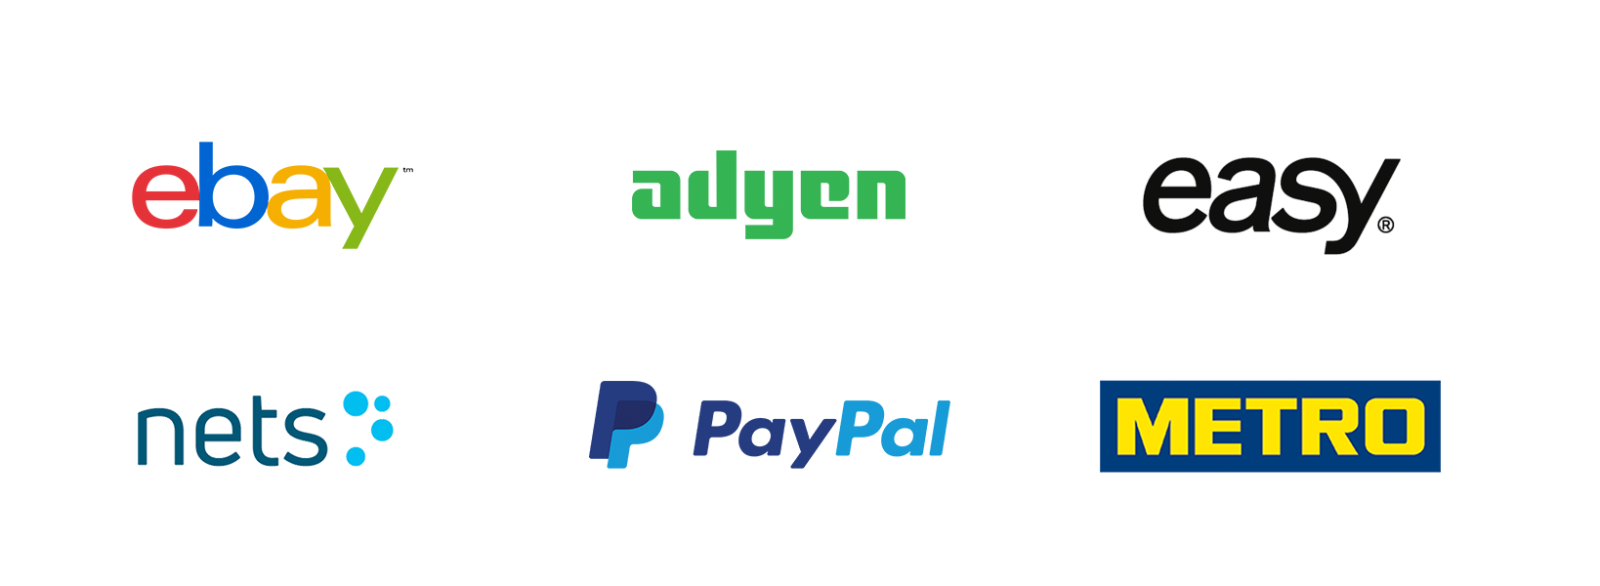 ratepay kunden reseller